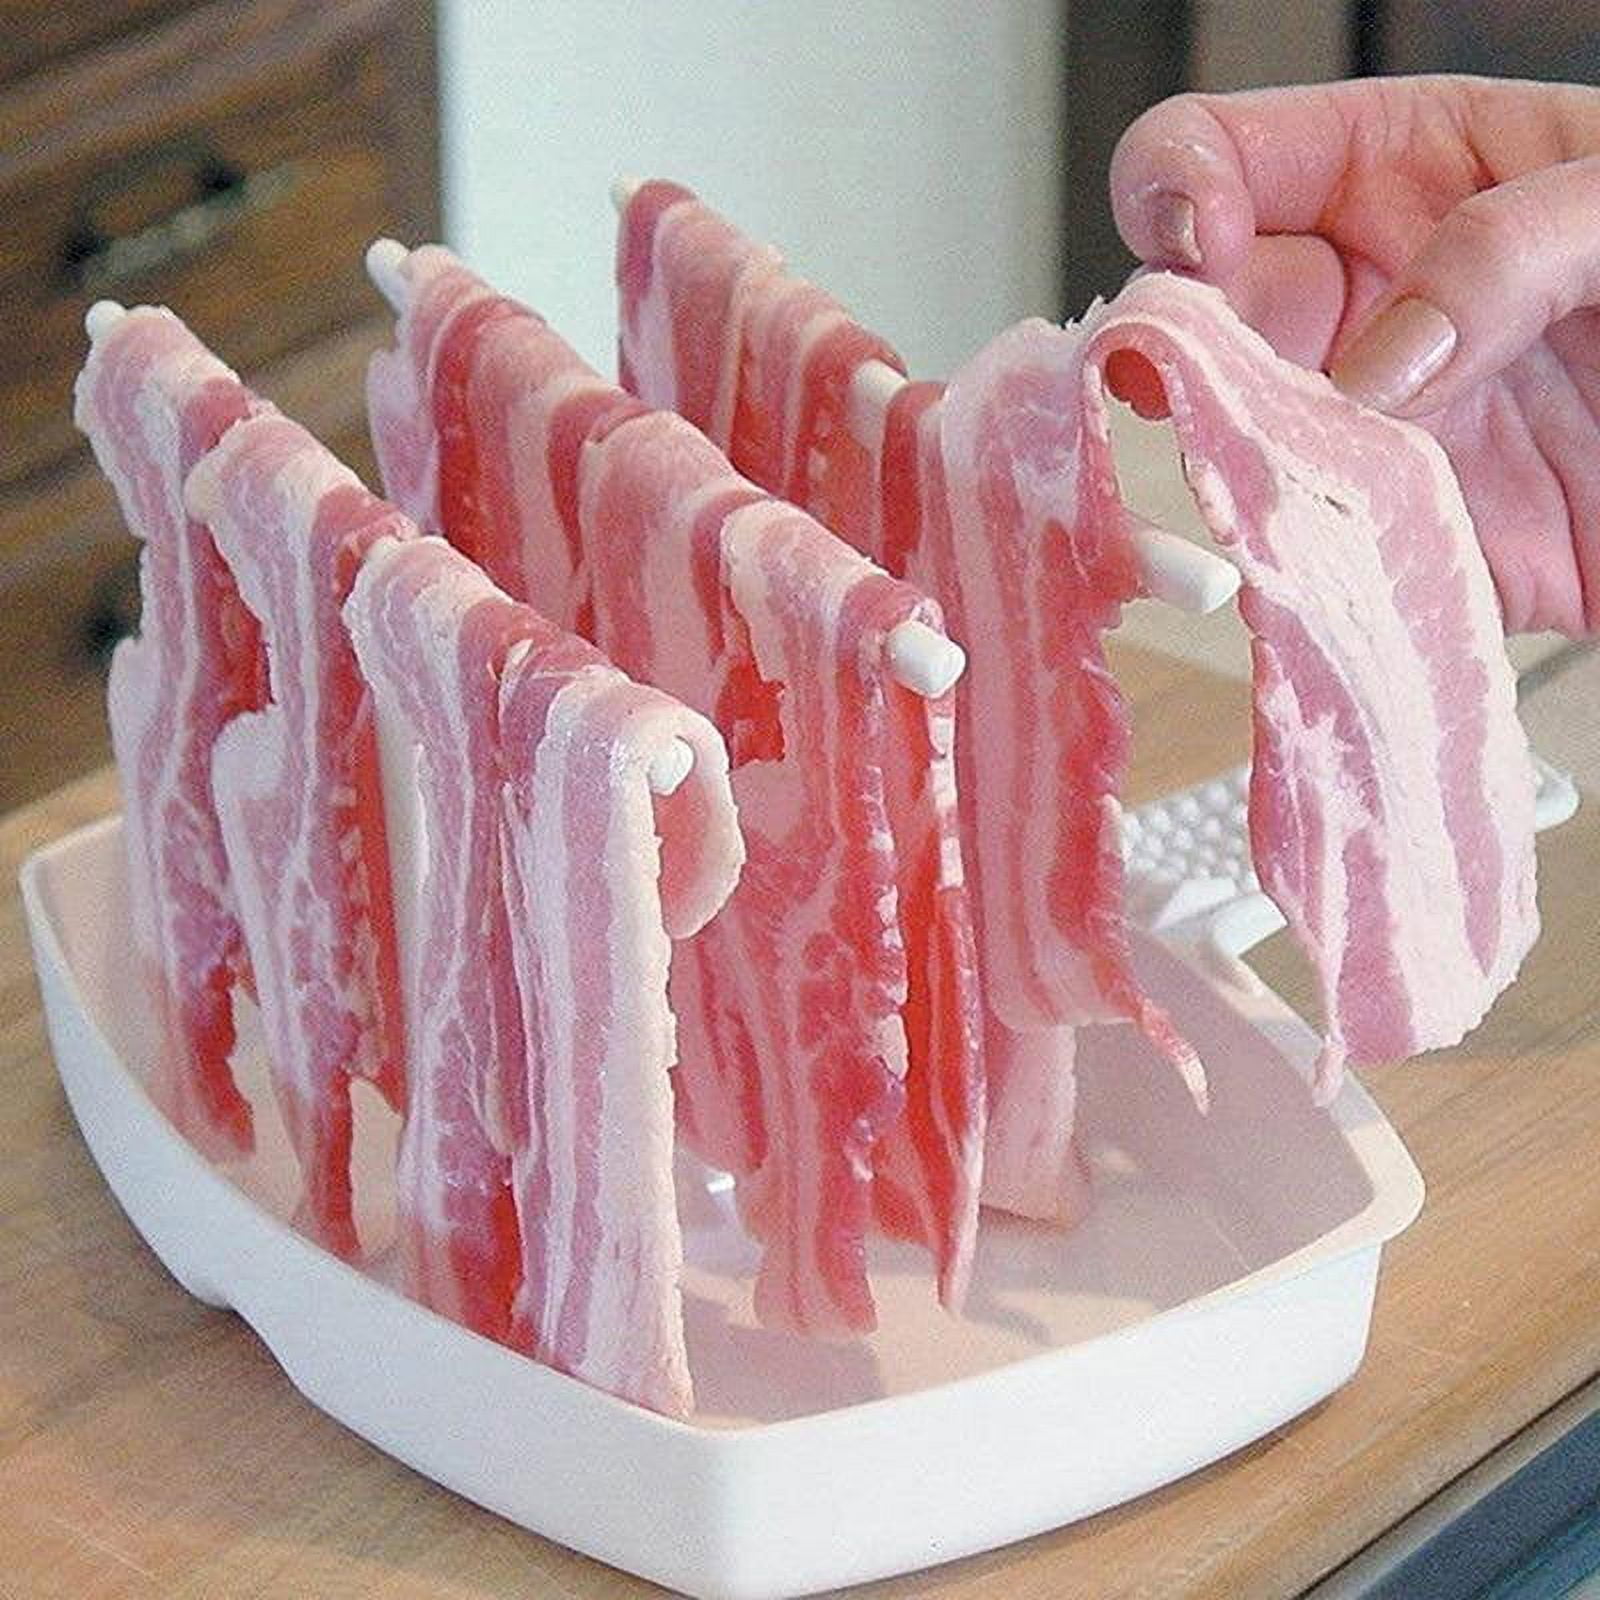 Household Cooking Microwave Bacon Cooker Shelf Rack High Temperature  Resistance